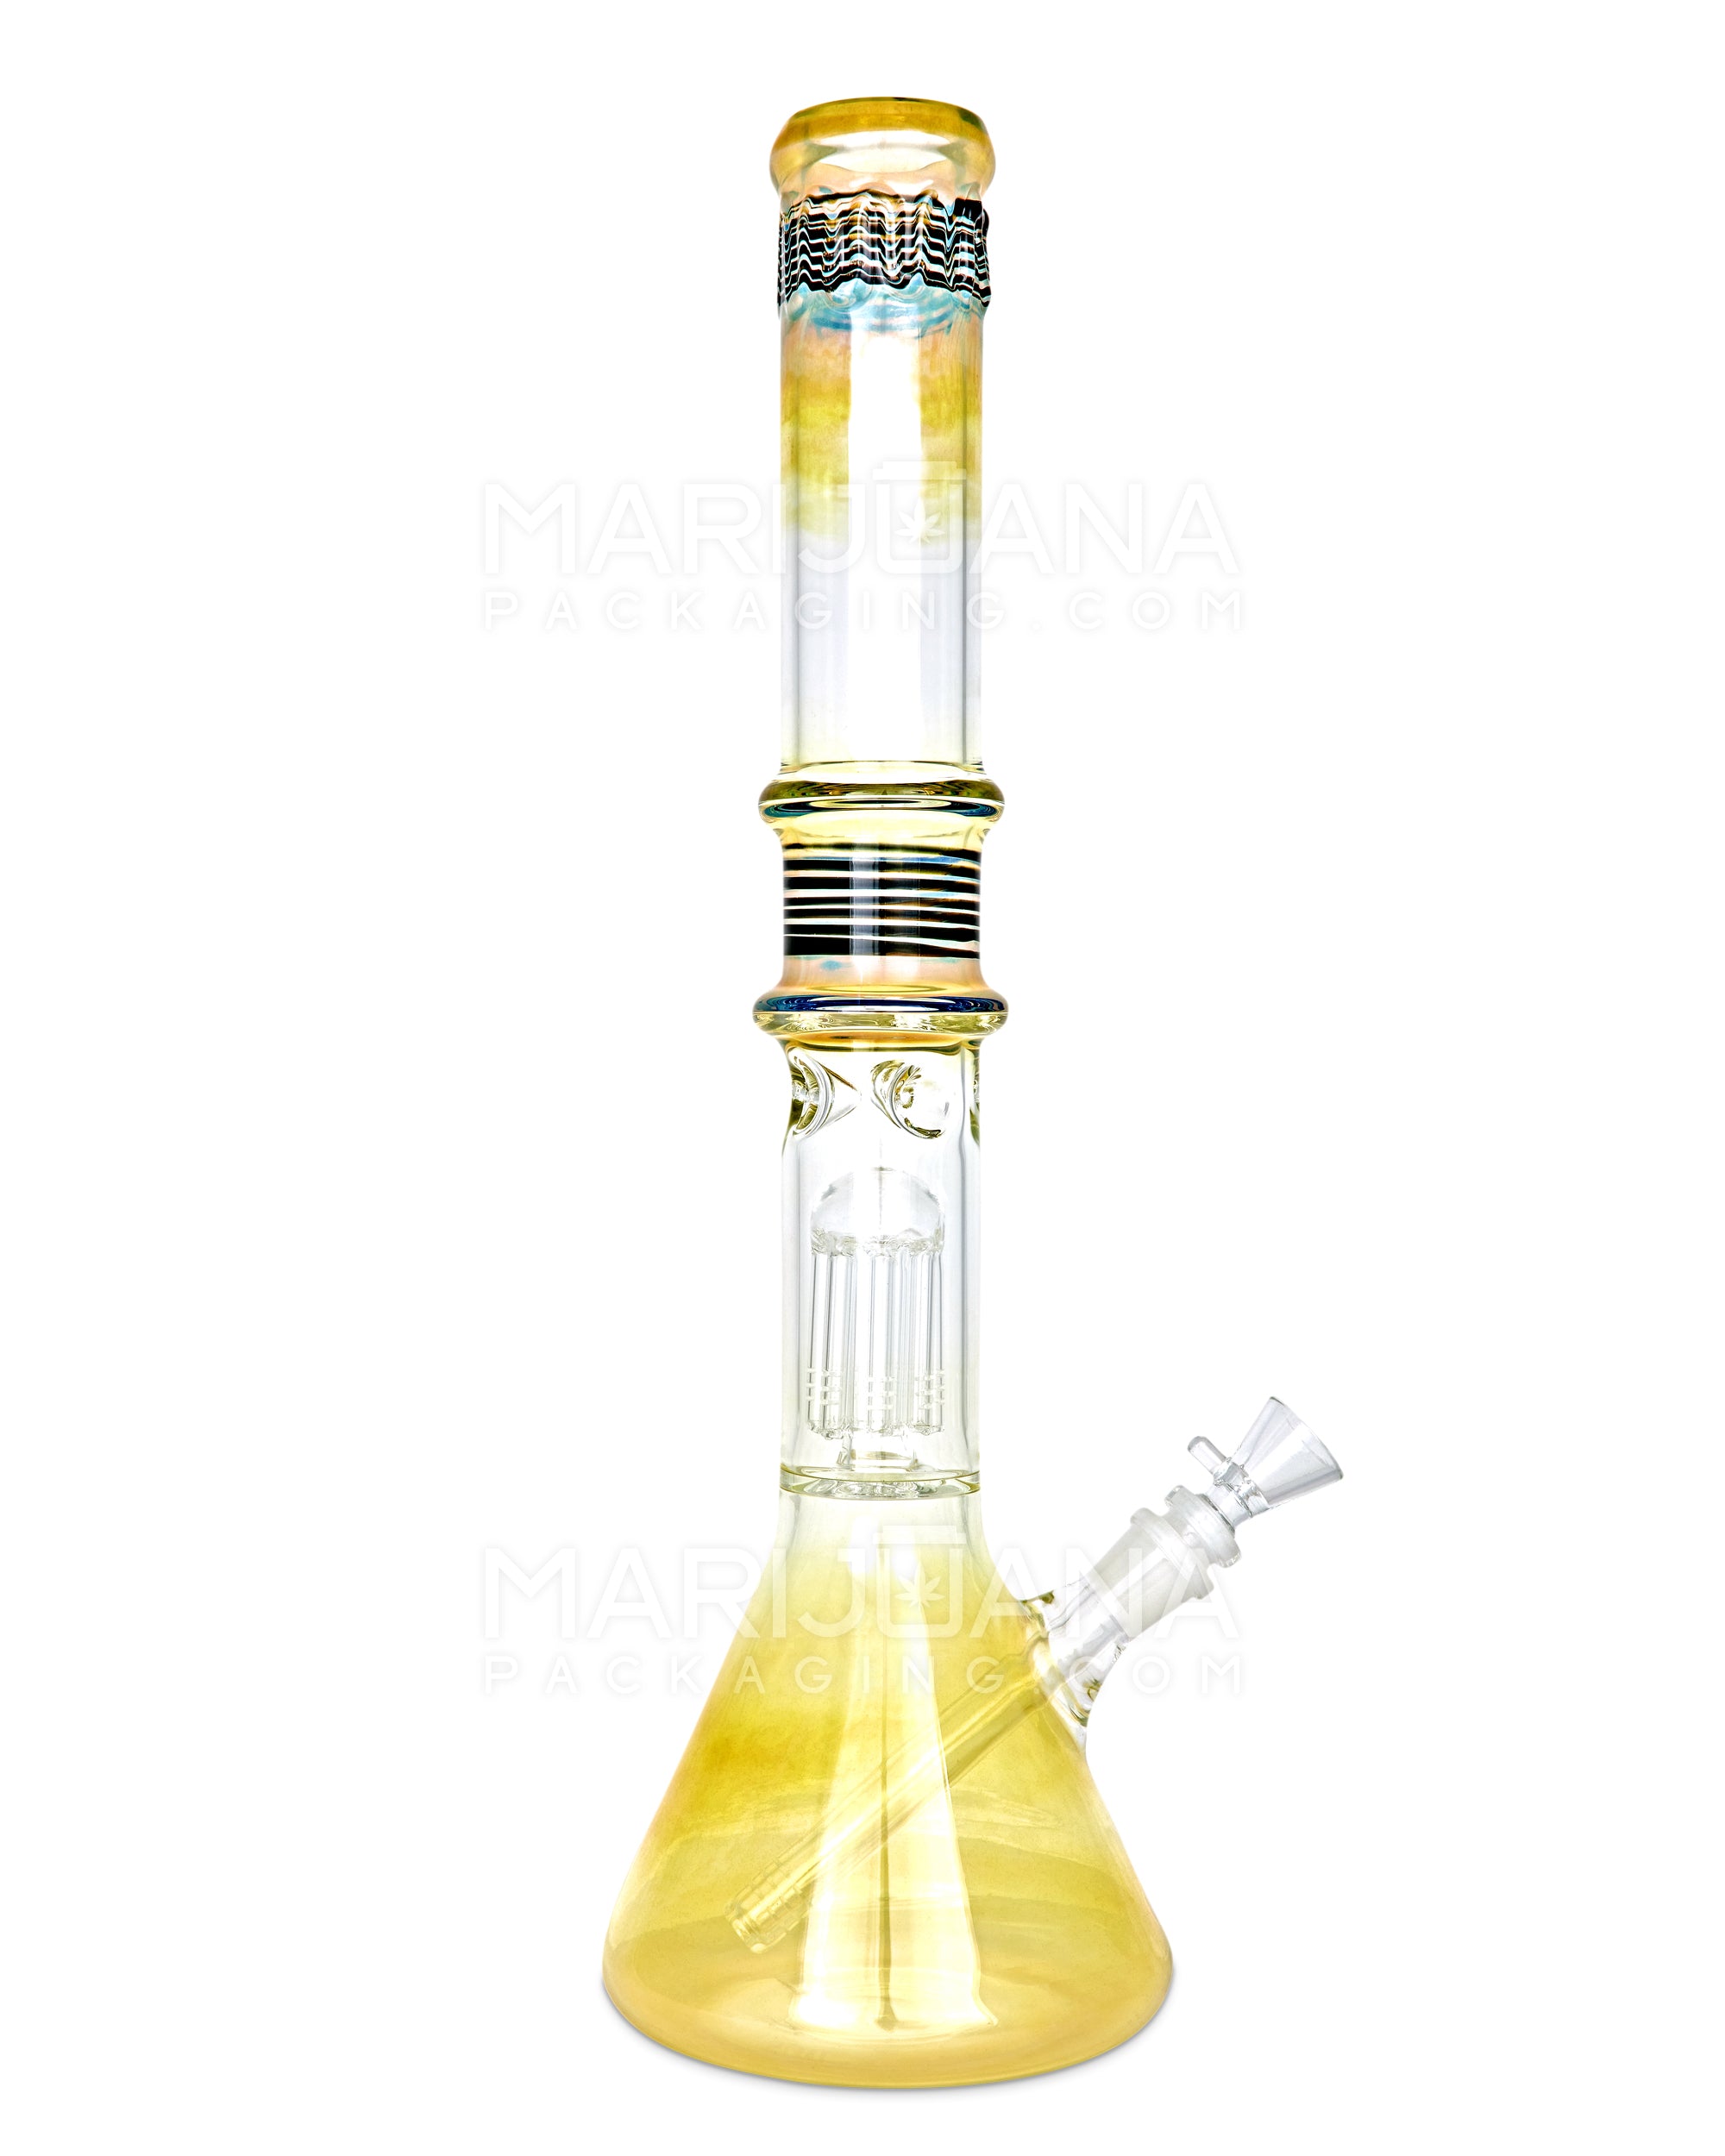 USA Glass | Straight Neck Tree Perc Fumed Glass Beaker Water Pipe w/ Ice Catcher | 18in Tall - 18mm Bowl - Assorted - 9